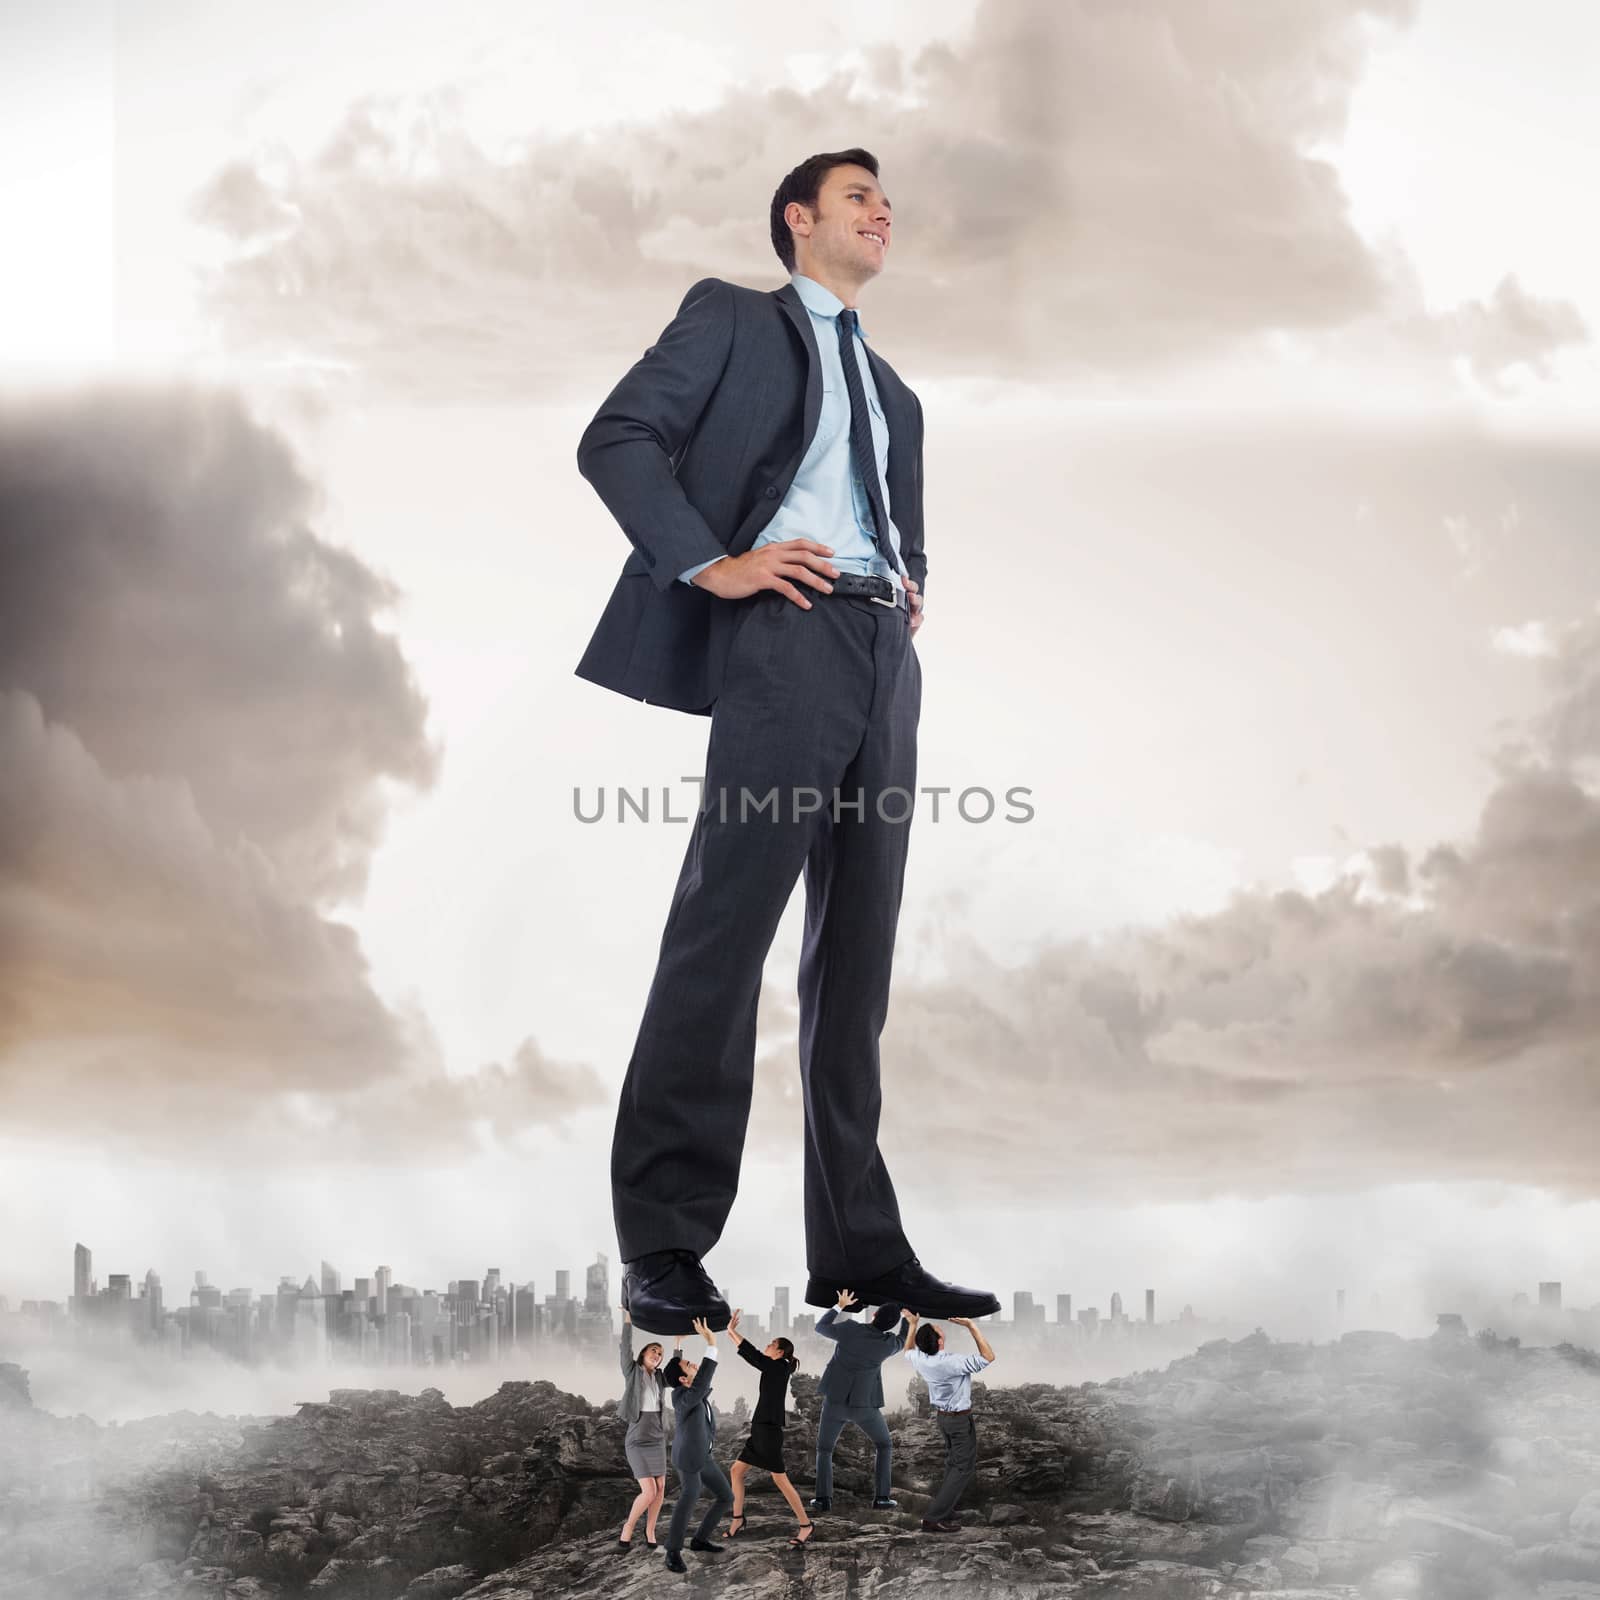 Composite image of business team supporting boss against misty landscape